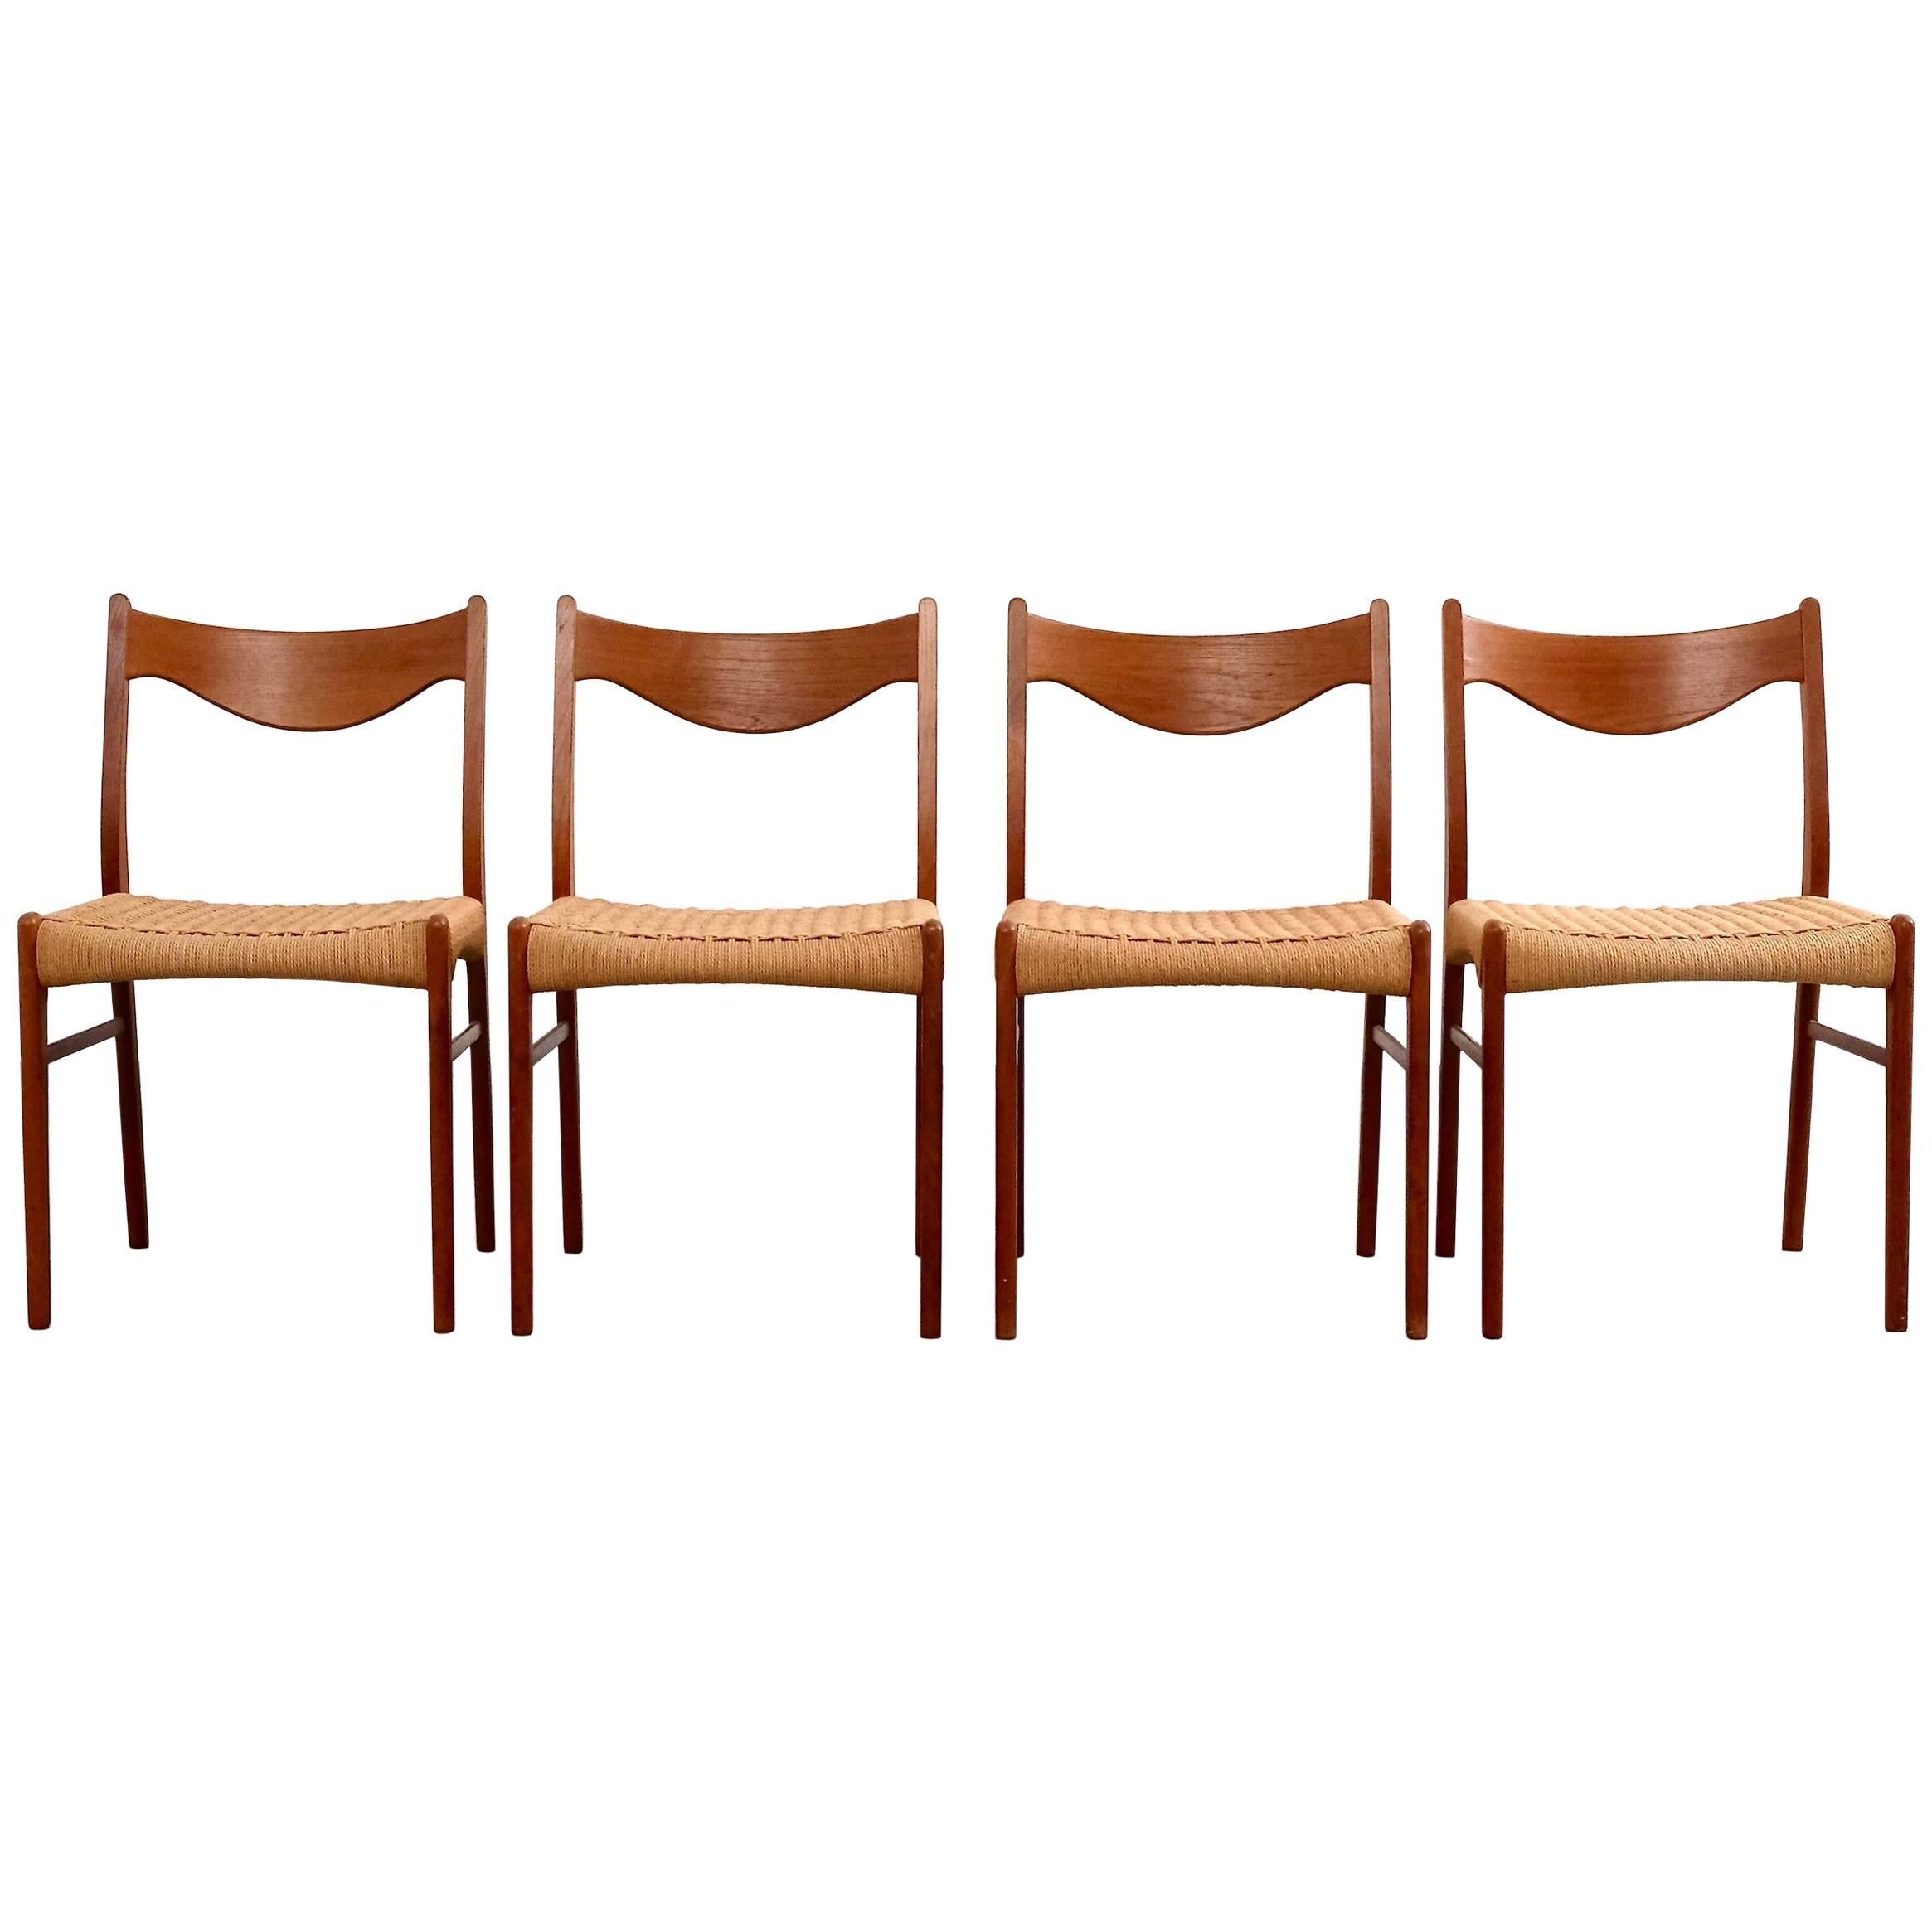 Teak and Paper Cord Chairs by Ejner Larsen & Aksel Bender Madsen, Set of Four